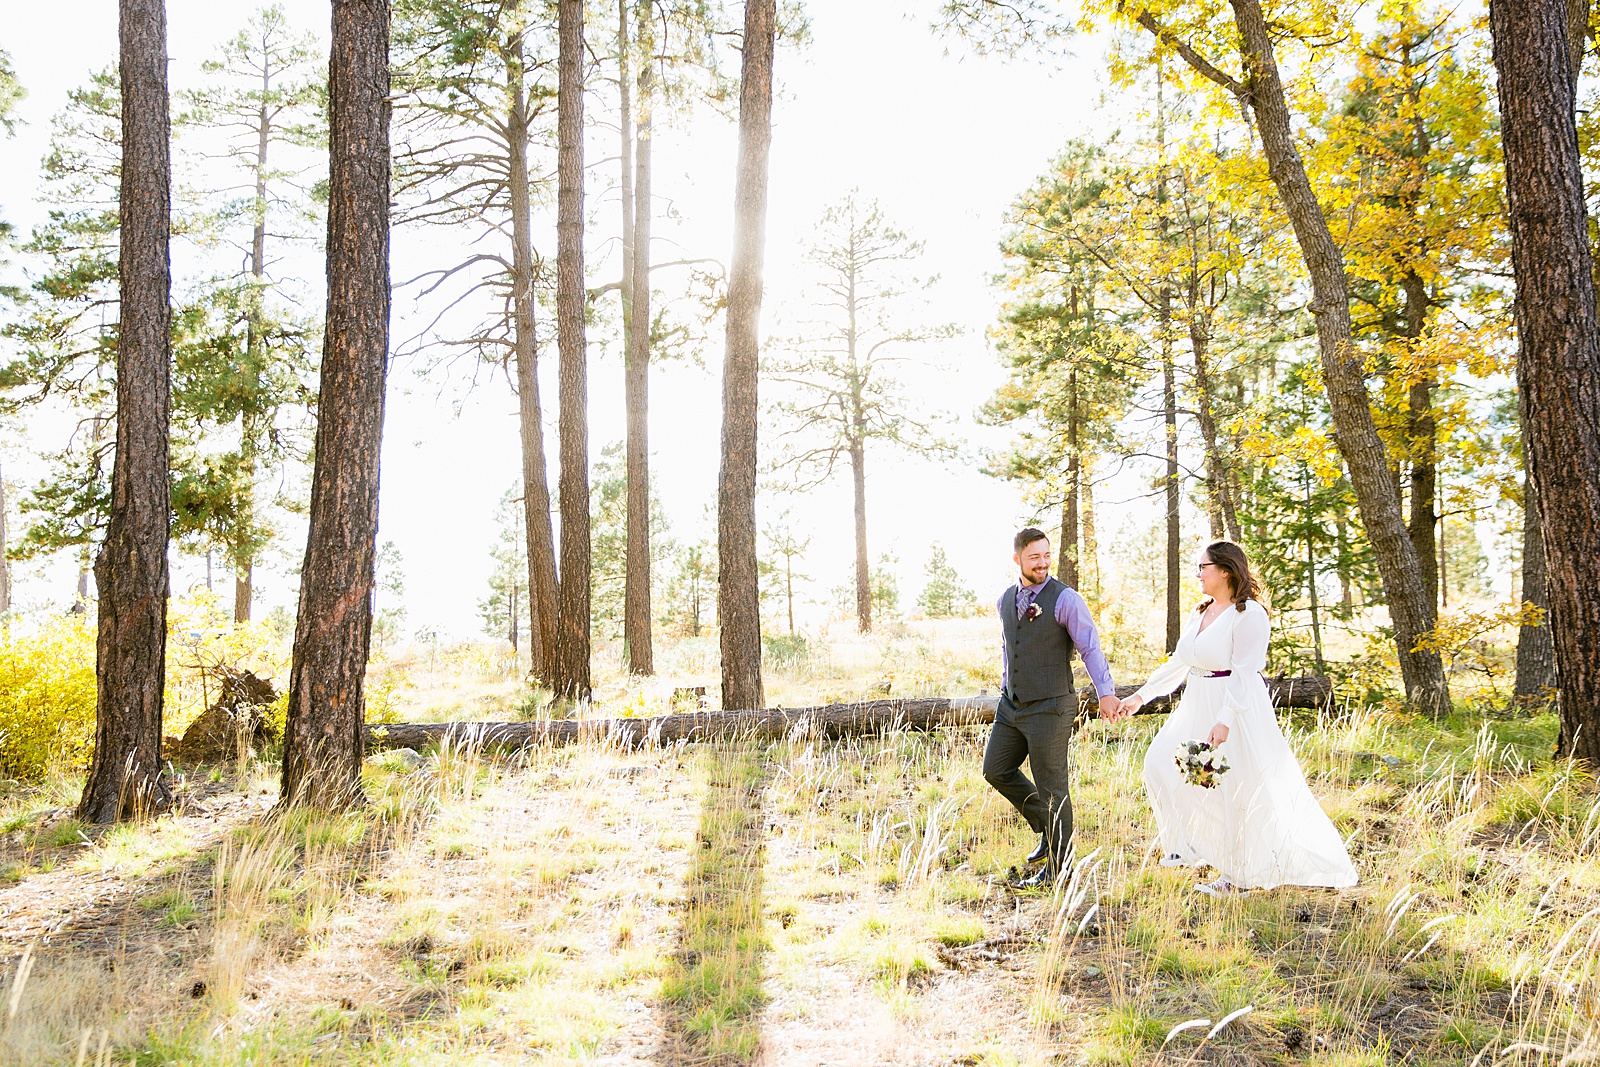 Bride and Groom walking together through the forest during their Mogollon Rim elopement by Arizona elopement photographer PMA Photography.